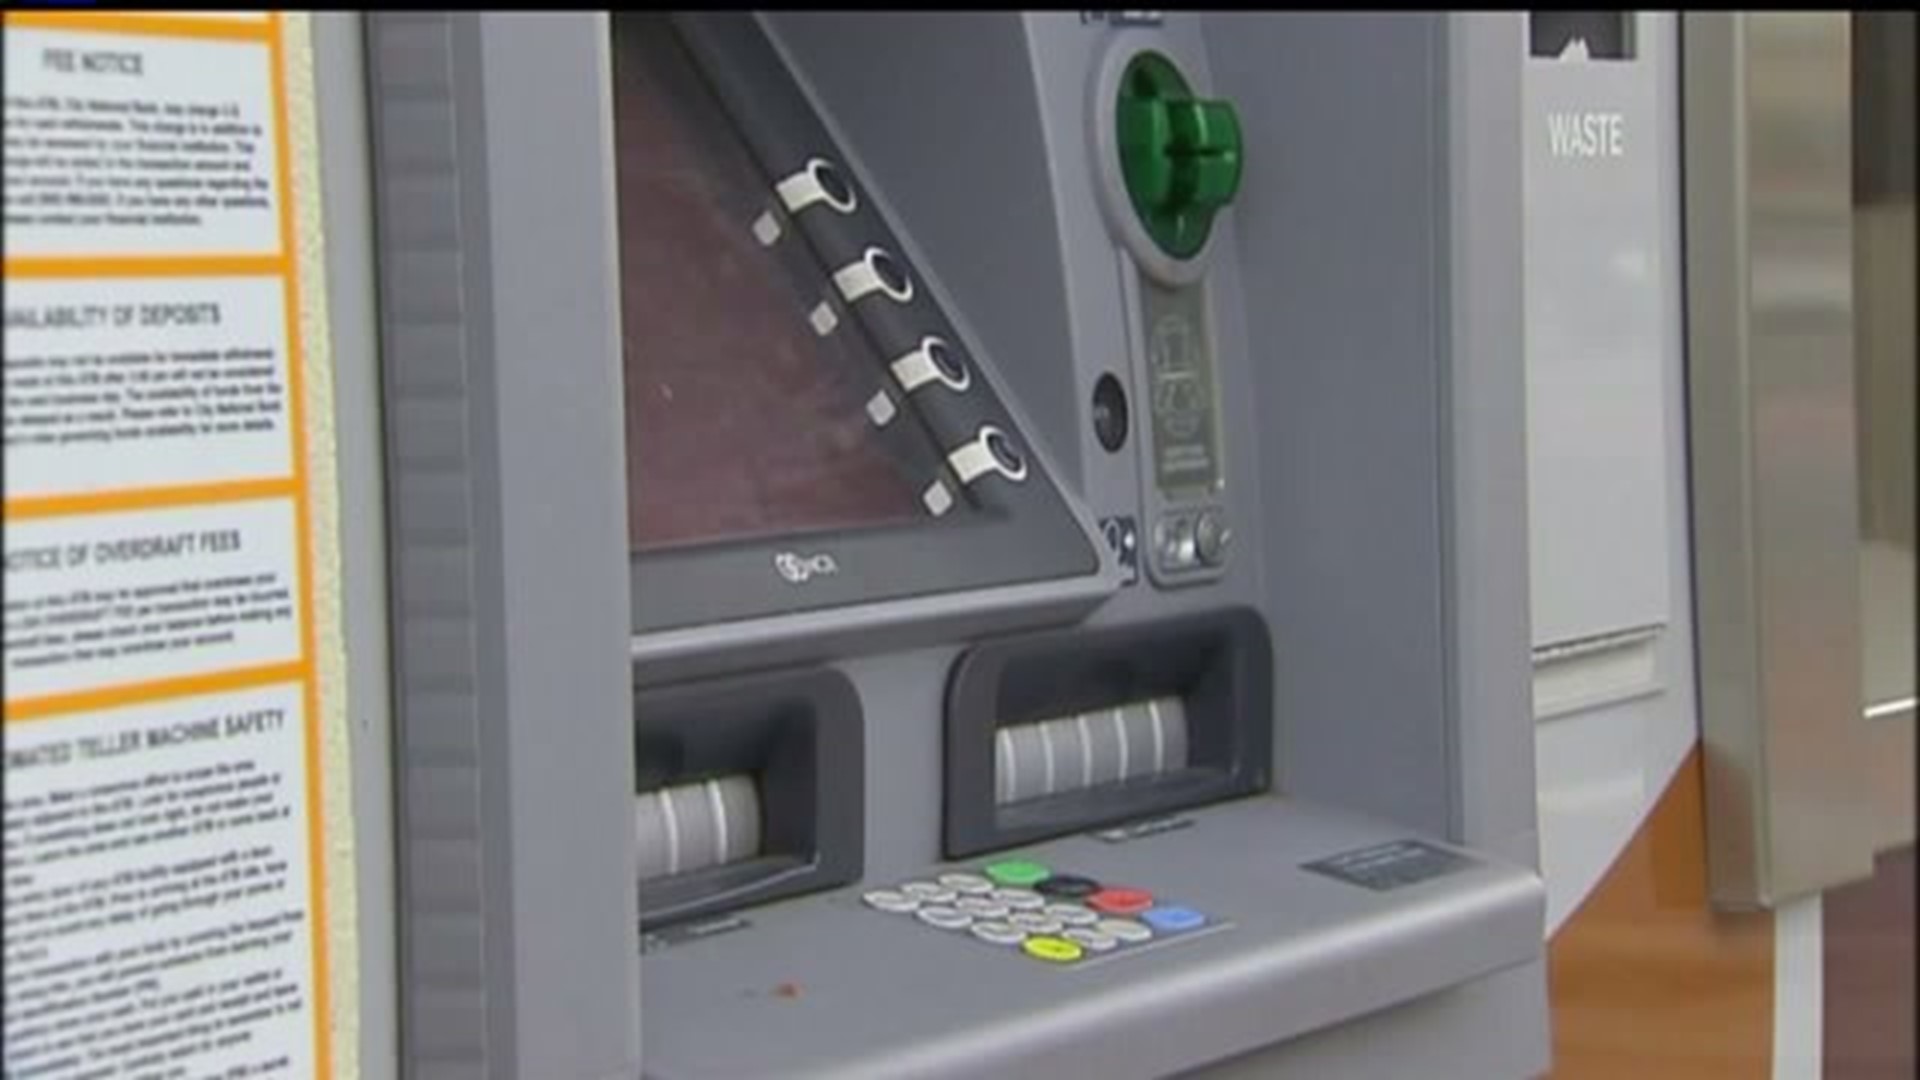 Skimming robs family of more than $1,000, nearly two dozen others report being scammed in York County